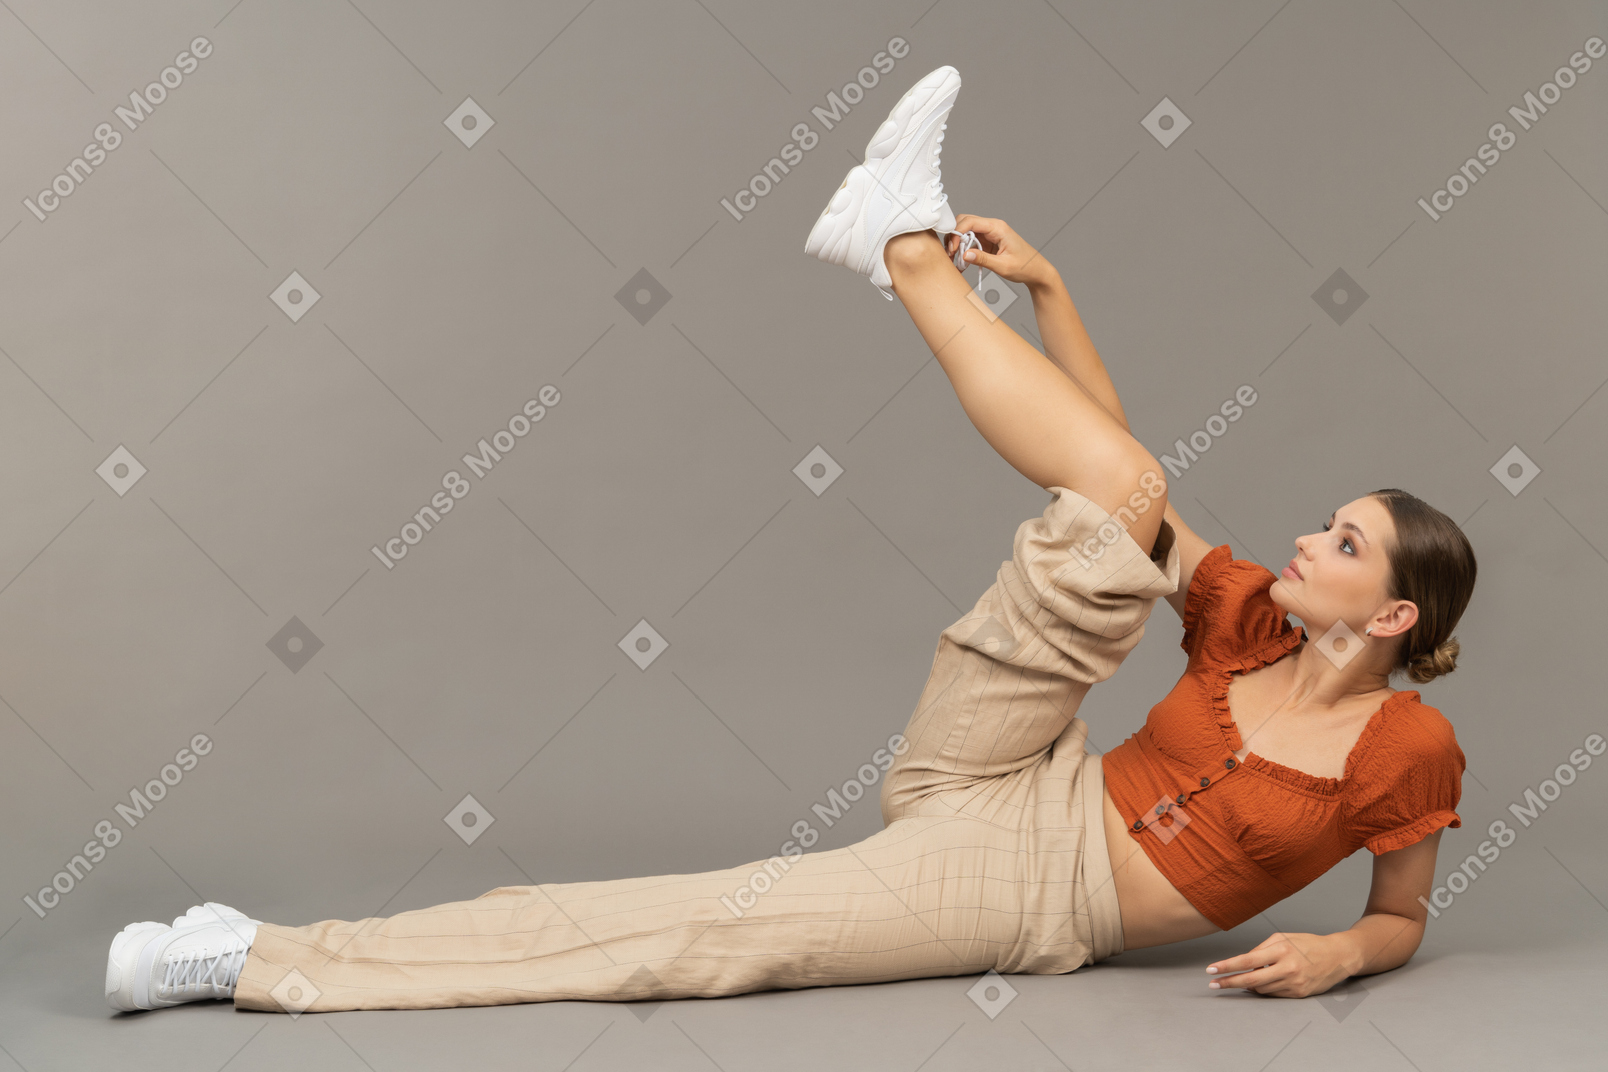 Young woman lies down with her leg up